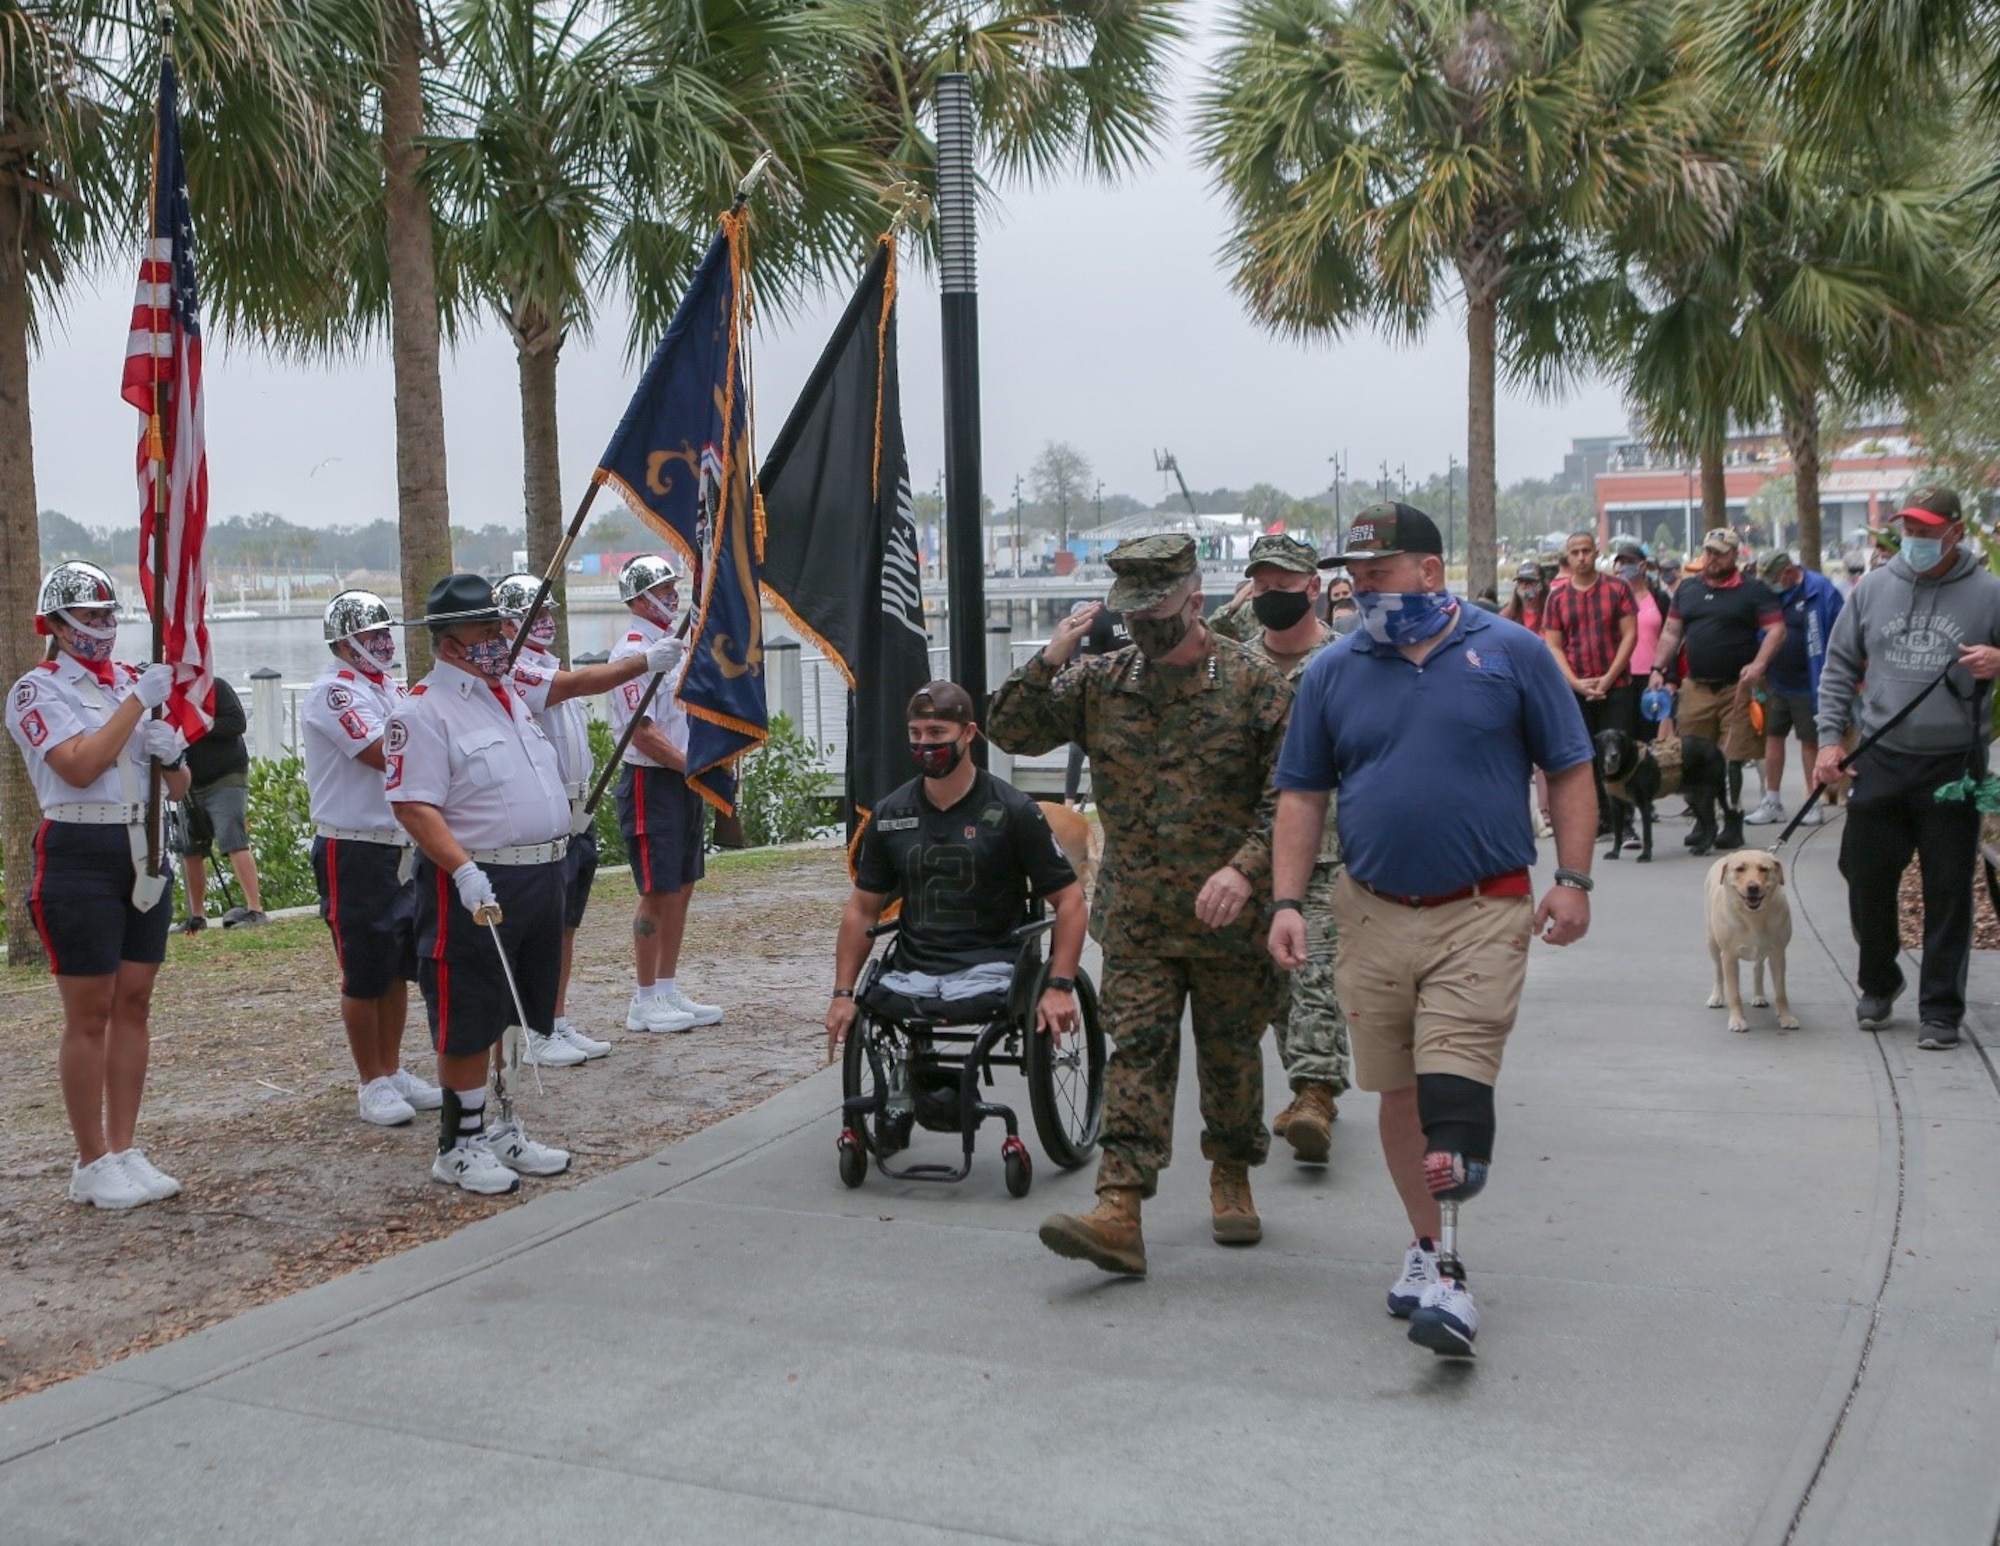 U.S. Marine Corps General Kenneth F. McKenzie Jr., the commander of U.S. Central Command, walking alongside veterans of multiple United States military branches, salutes the members of the AVAST Color Guard, composed of Tampa Bay veterans, during the ‘Salute-To-Service-Stroll’ Feb. 6, 2021, at the Tampa Riverwalk, Tampa, Florida. The event was organized by Sierra Delta, a nonprofit aimed at connecting veterans with service dog training. (U.S. Army photo by Spc. Robert Vicens)